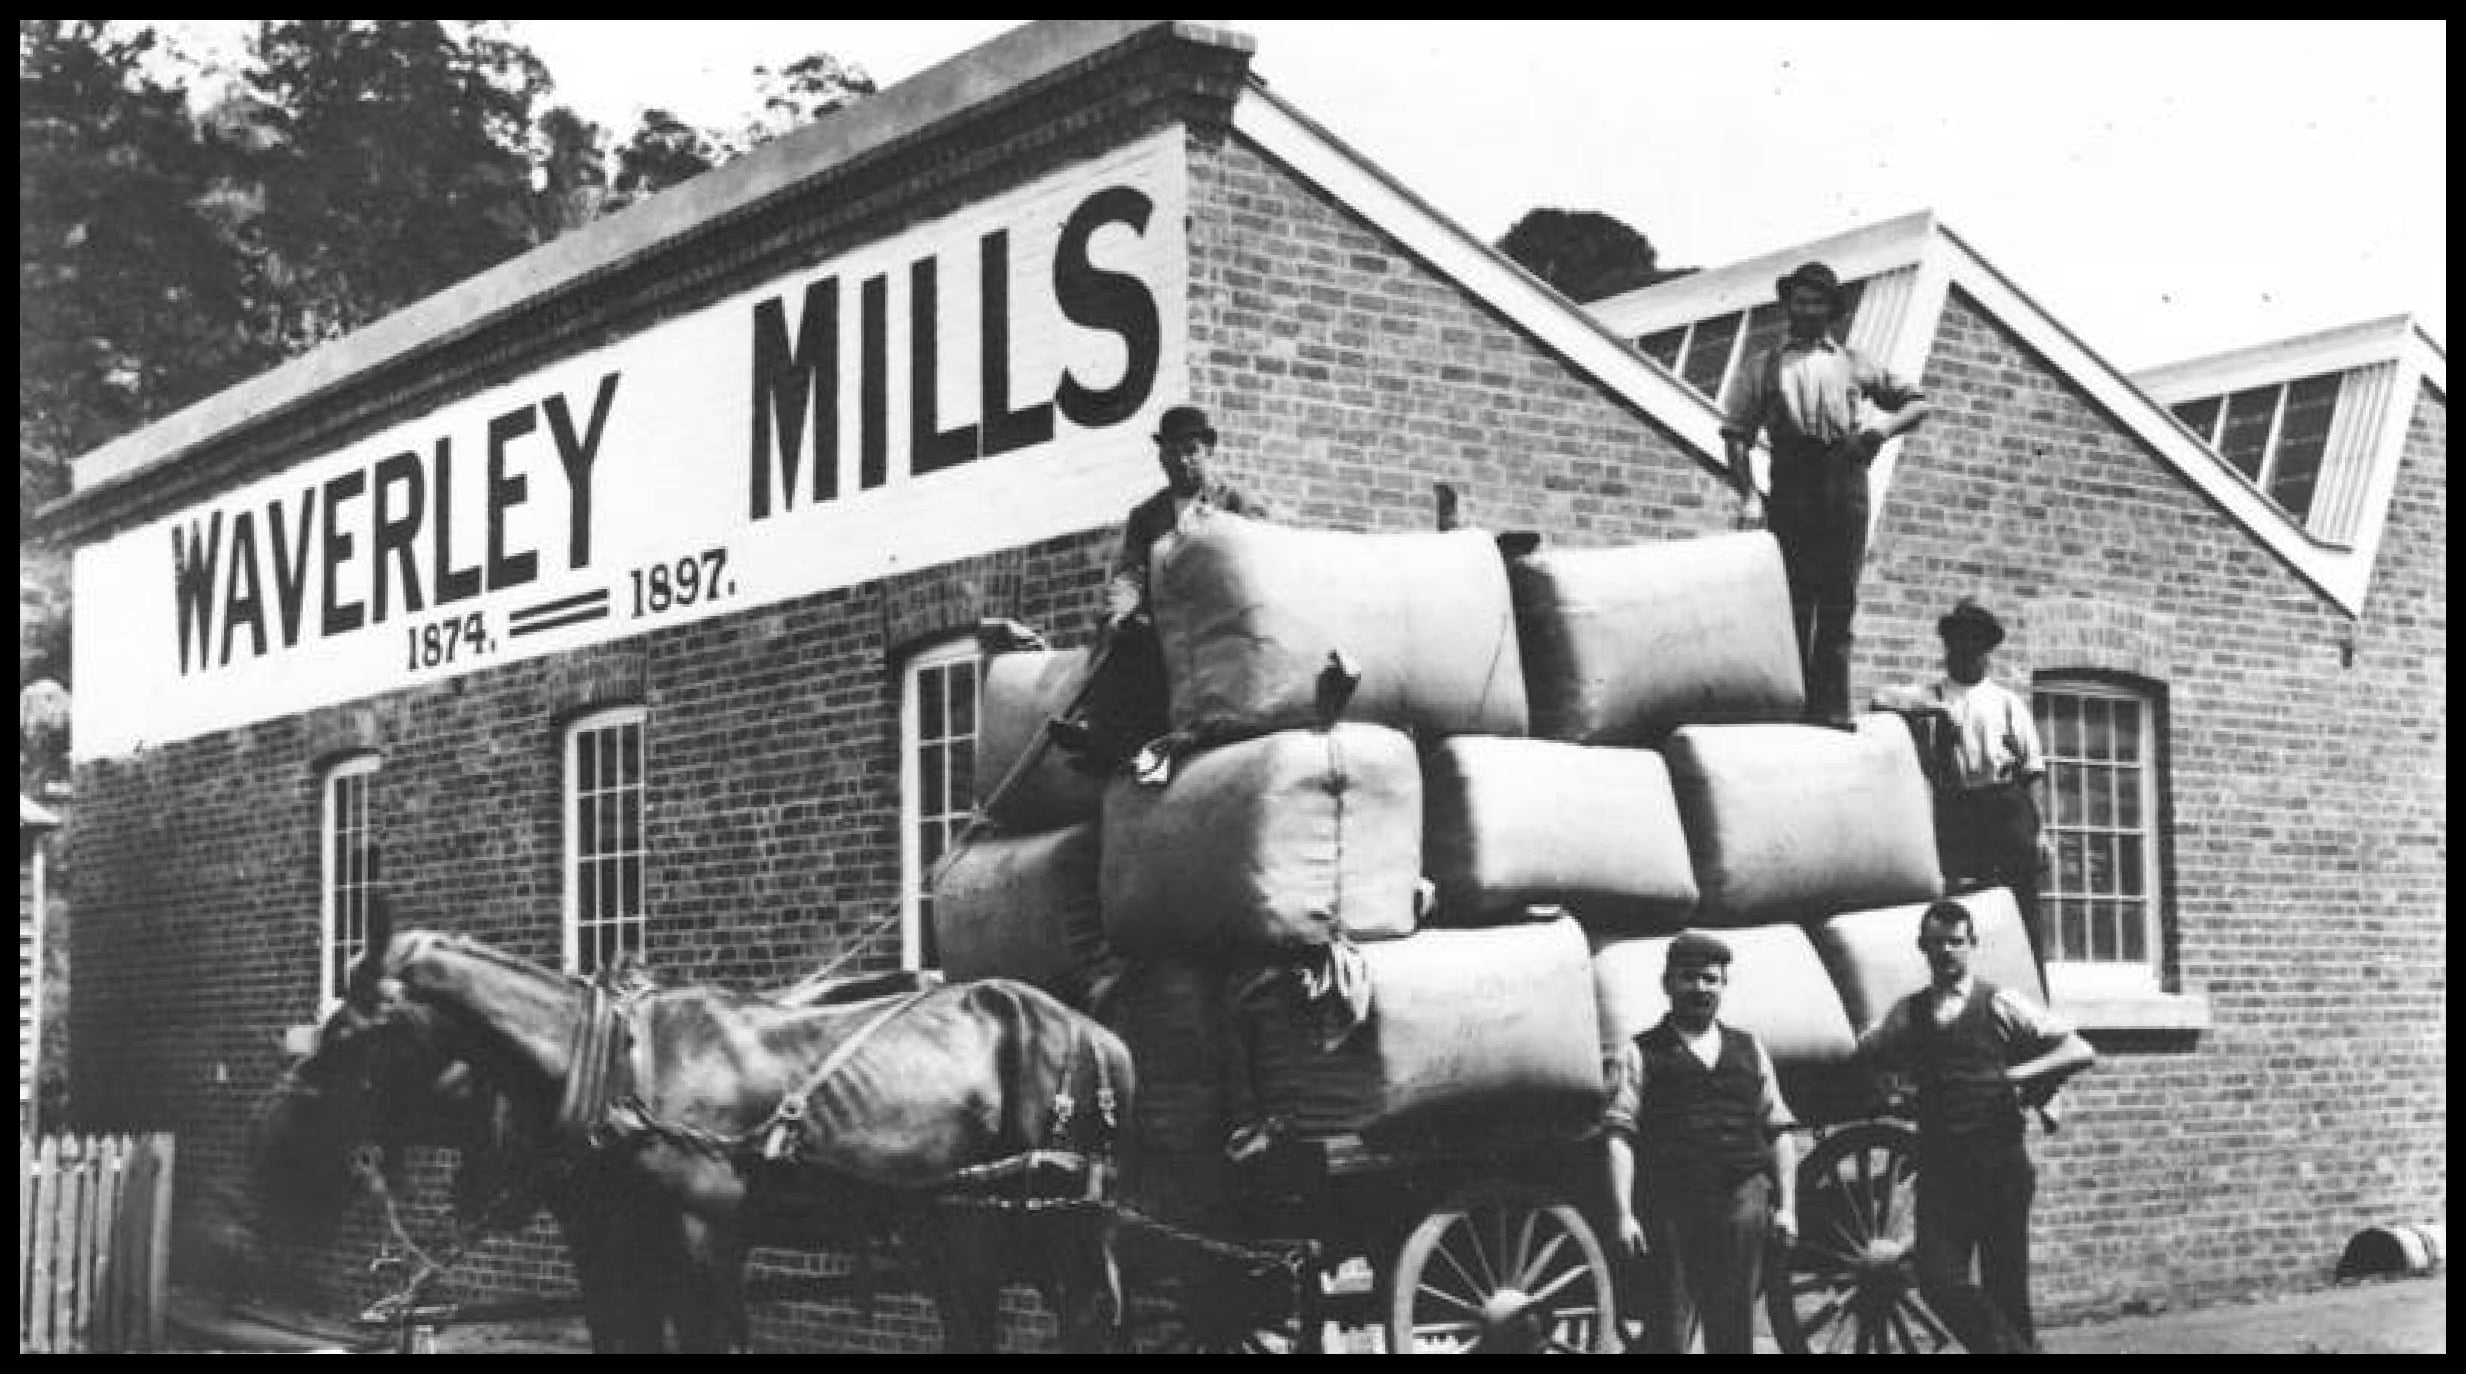 Historic image of staff at the mill in the 1890's.